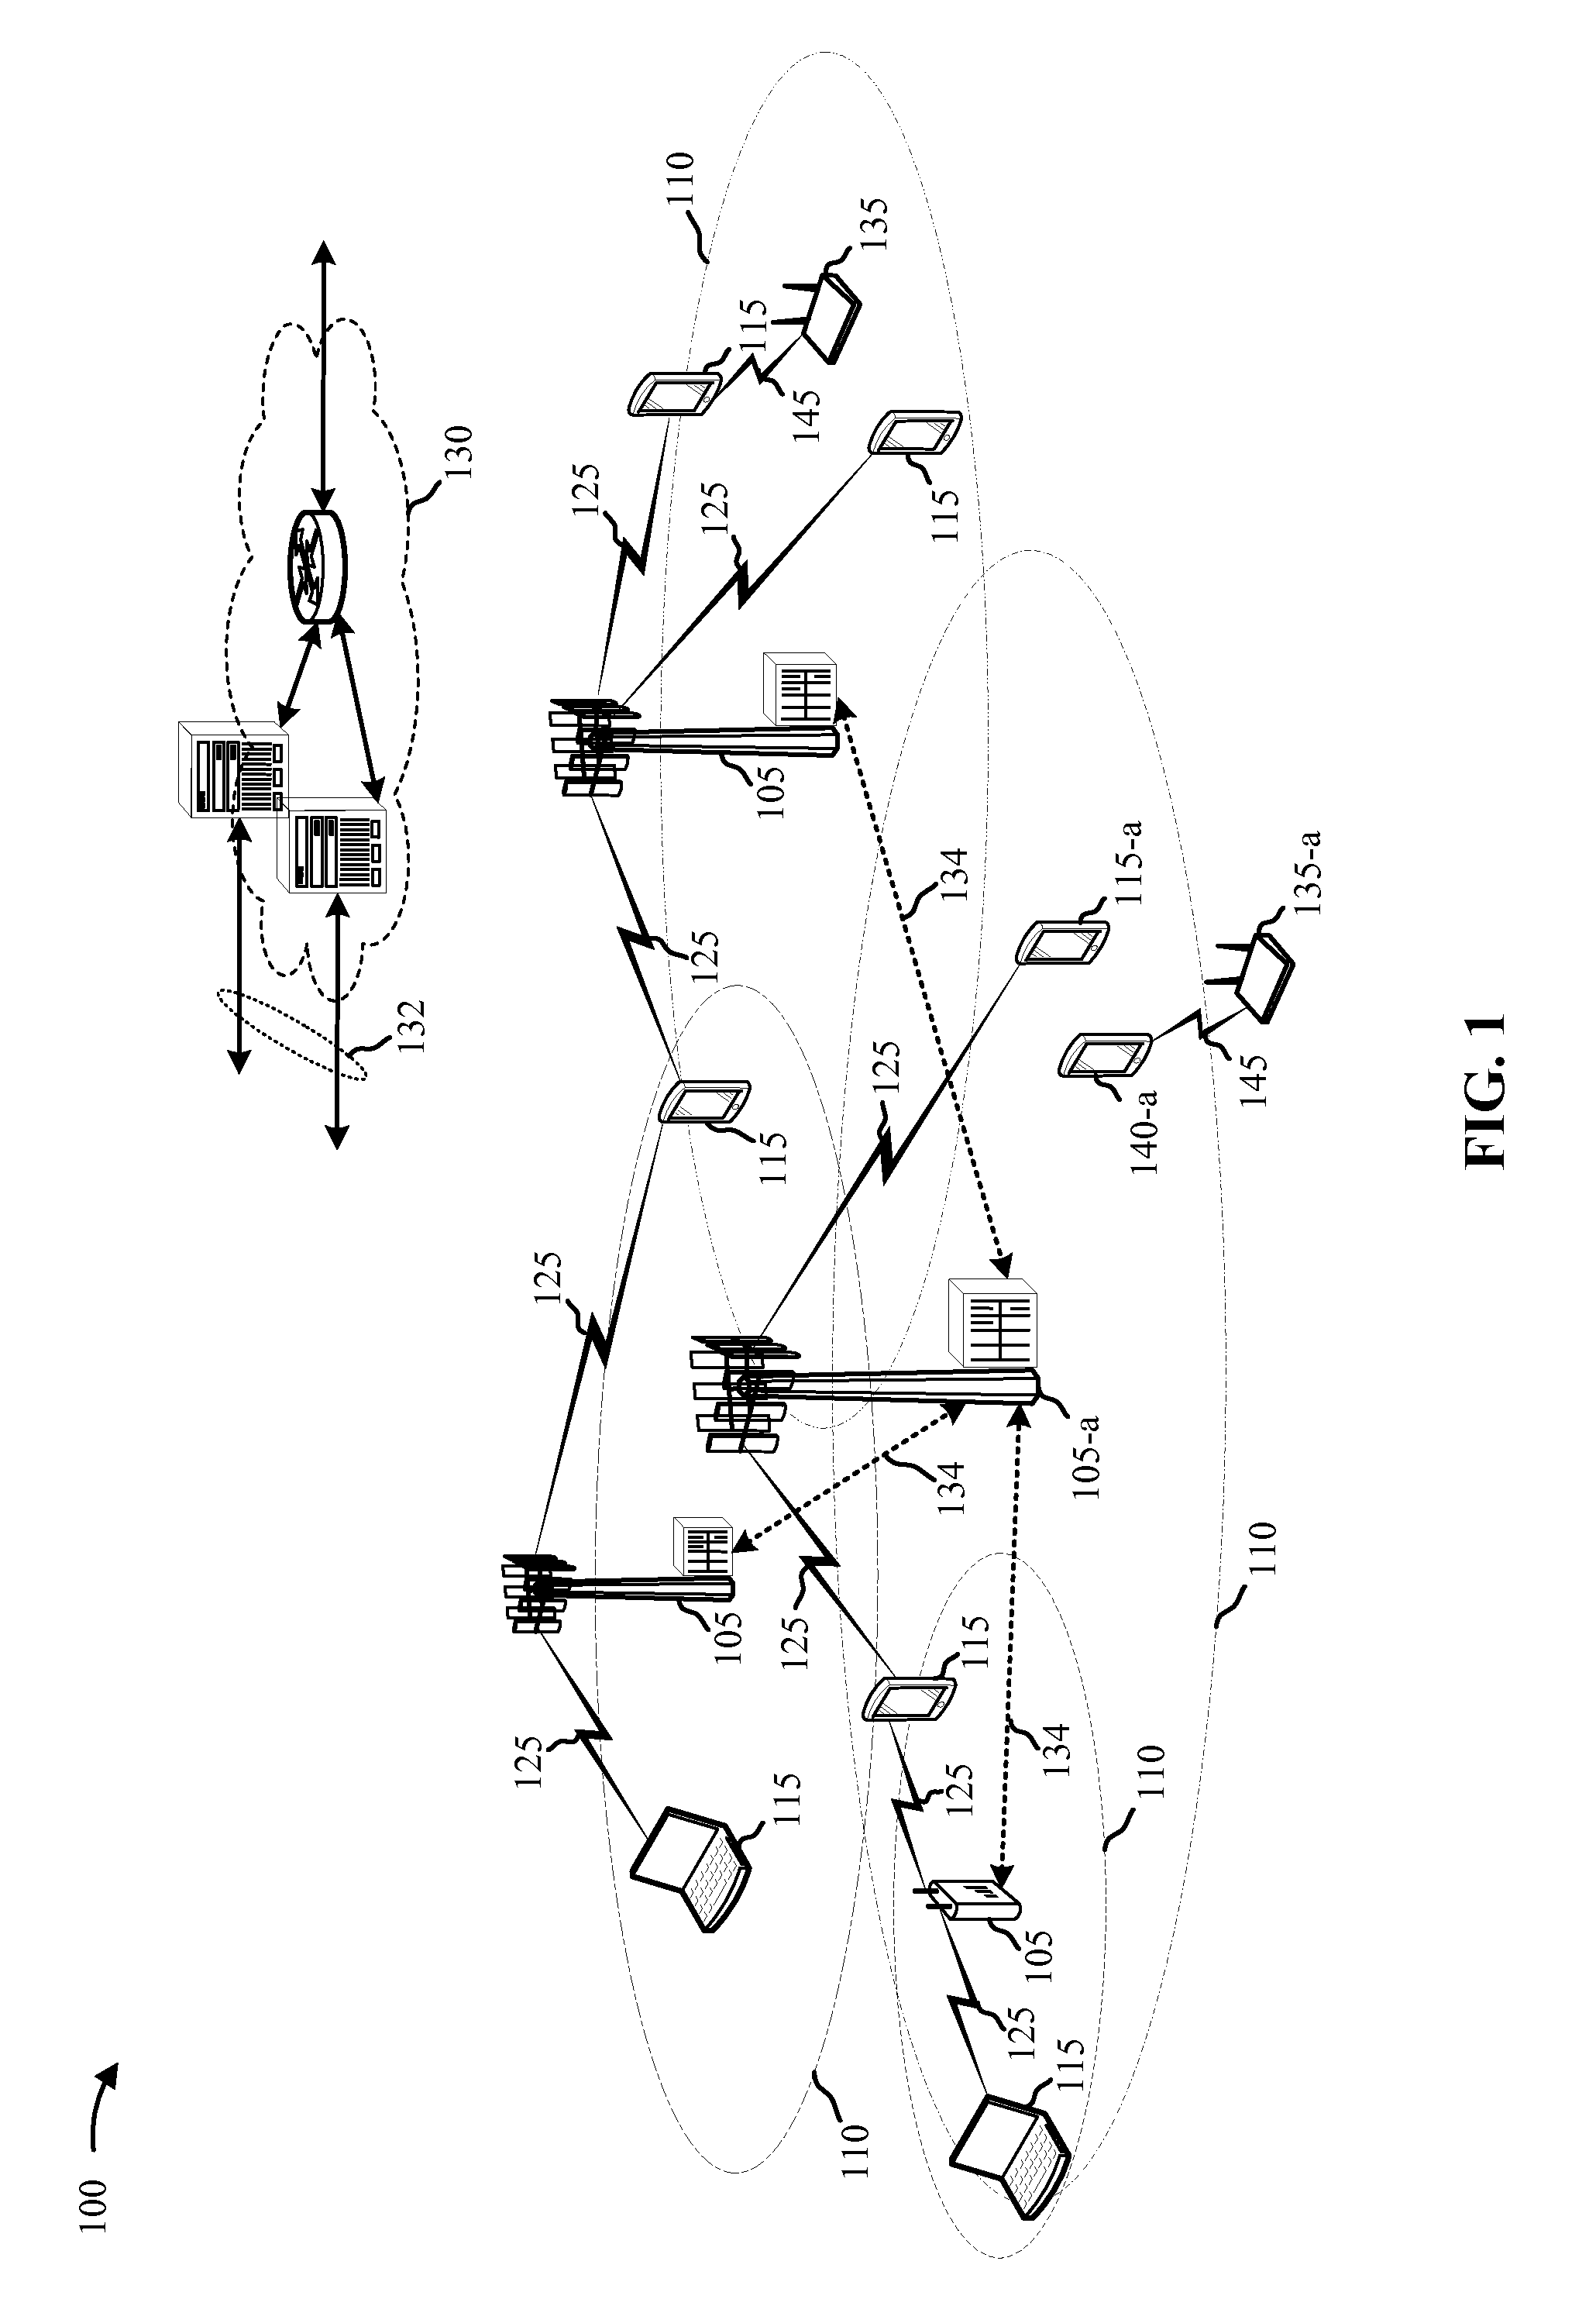 Techniques for transmitting preambles over an unlicensed radio frequency spectrum band